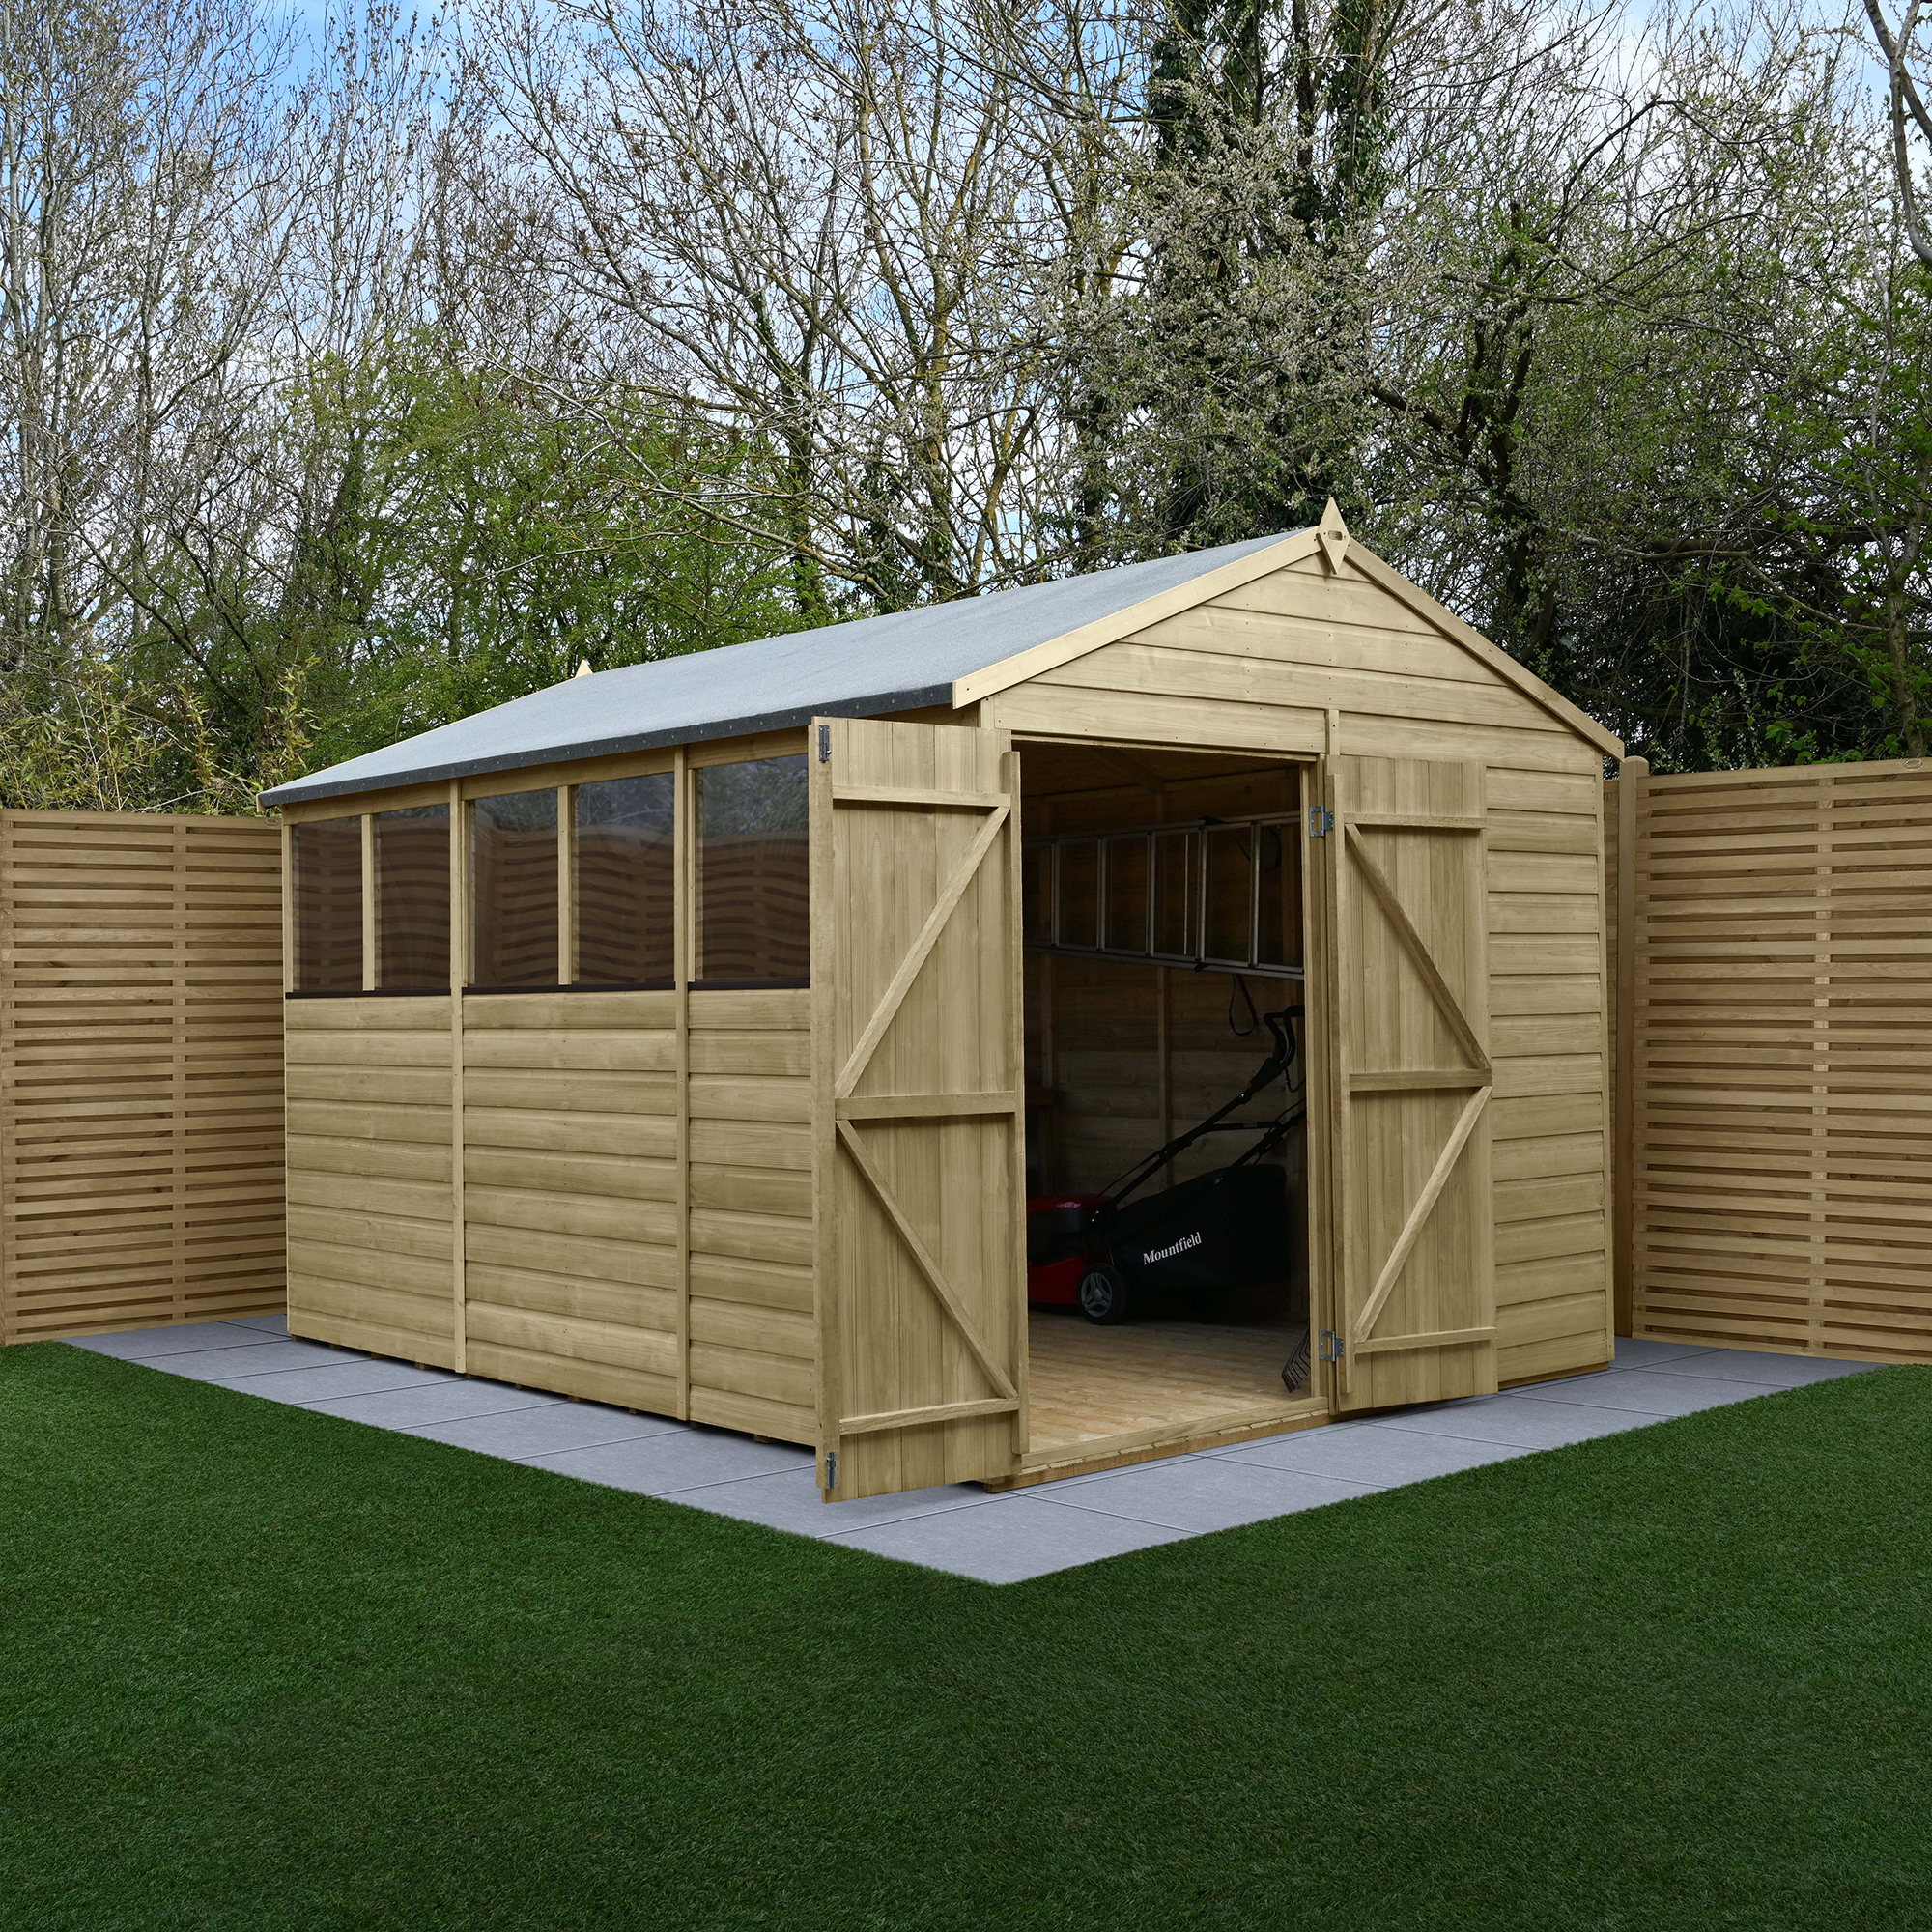 Forest Garden Beckwood 8 x 12ft Apex Shiplap Pressure Treated Double Door Shed